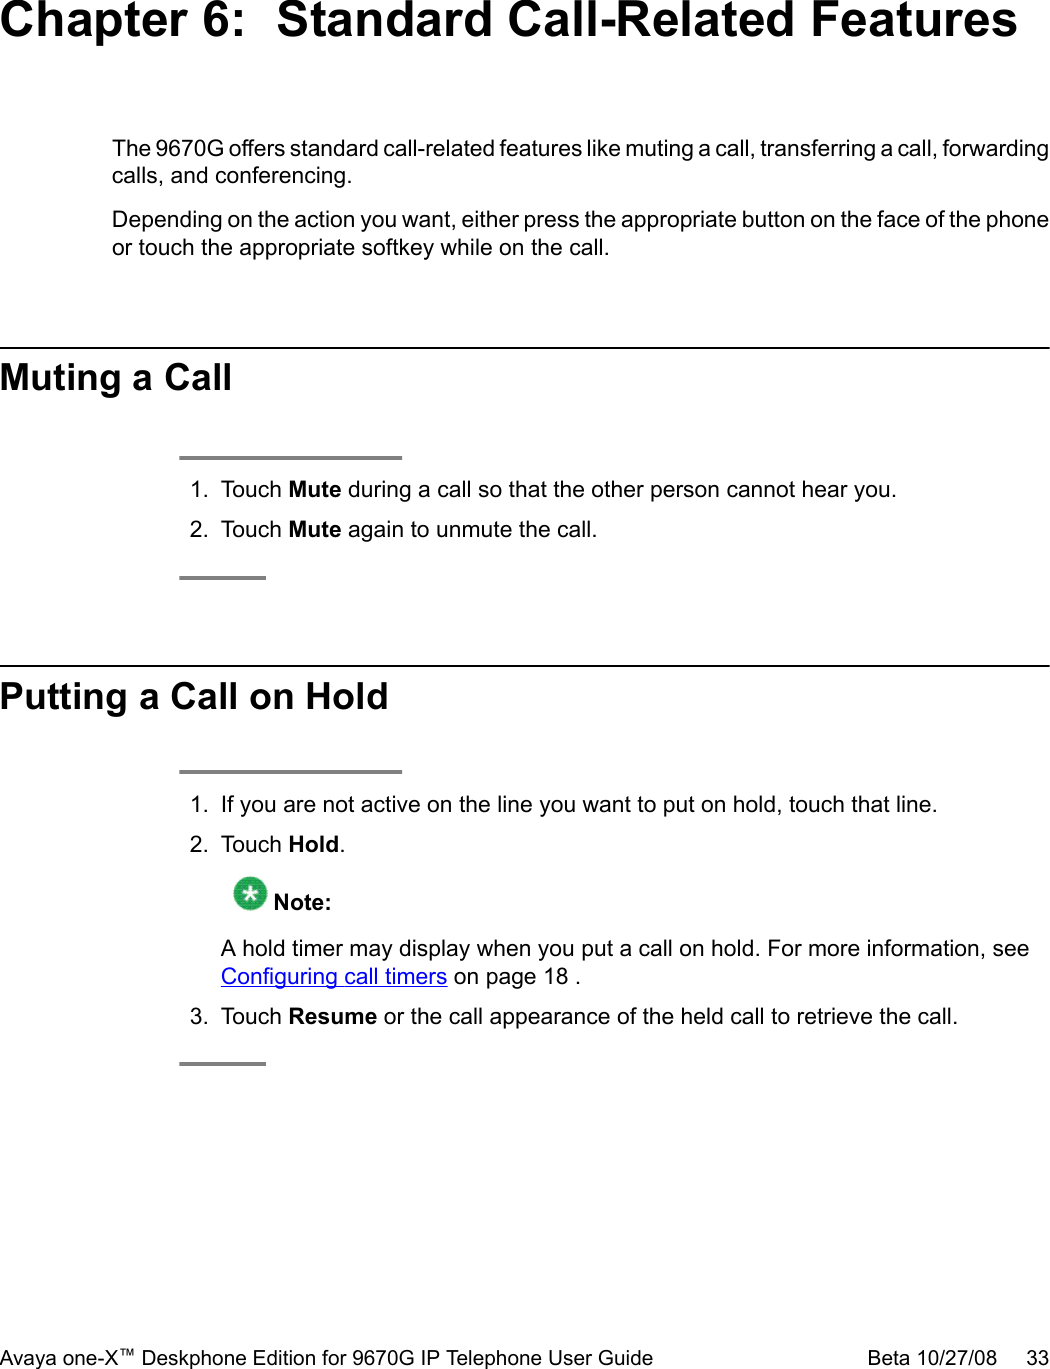 Chapter 6:  Standard Call-Related FeaturesThe 9670G offers standard call-related features like muting a call, transferring a call, forwardingcalls, and conferencing.Depending on the action you want, either press the appropriate button on the face of the phoneor touch the appropriate softkey while on the call.Muting a Call1. Touch Mute during a call so that the other person cannot hear you.2. Touch Mute again to unmute the call.Putting a Call on Hold1. If you are not active on the line you want to put on hold, touch that line.2. Touch Hold. Note:A hold timer may display when you put a call on hold. For more information, see Configuring call timers on page 18 .3. Touch Resume or the call appearance of the held call to retrieve the call.Avaya one-X™ Deskphone Edition for 9670G IP Telephone User Guide Beta 10/27/08     33